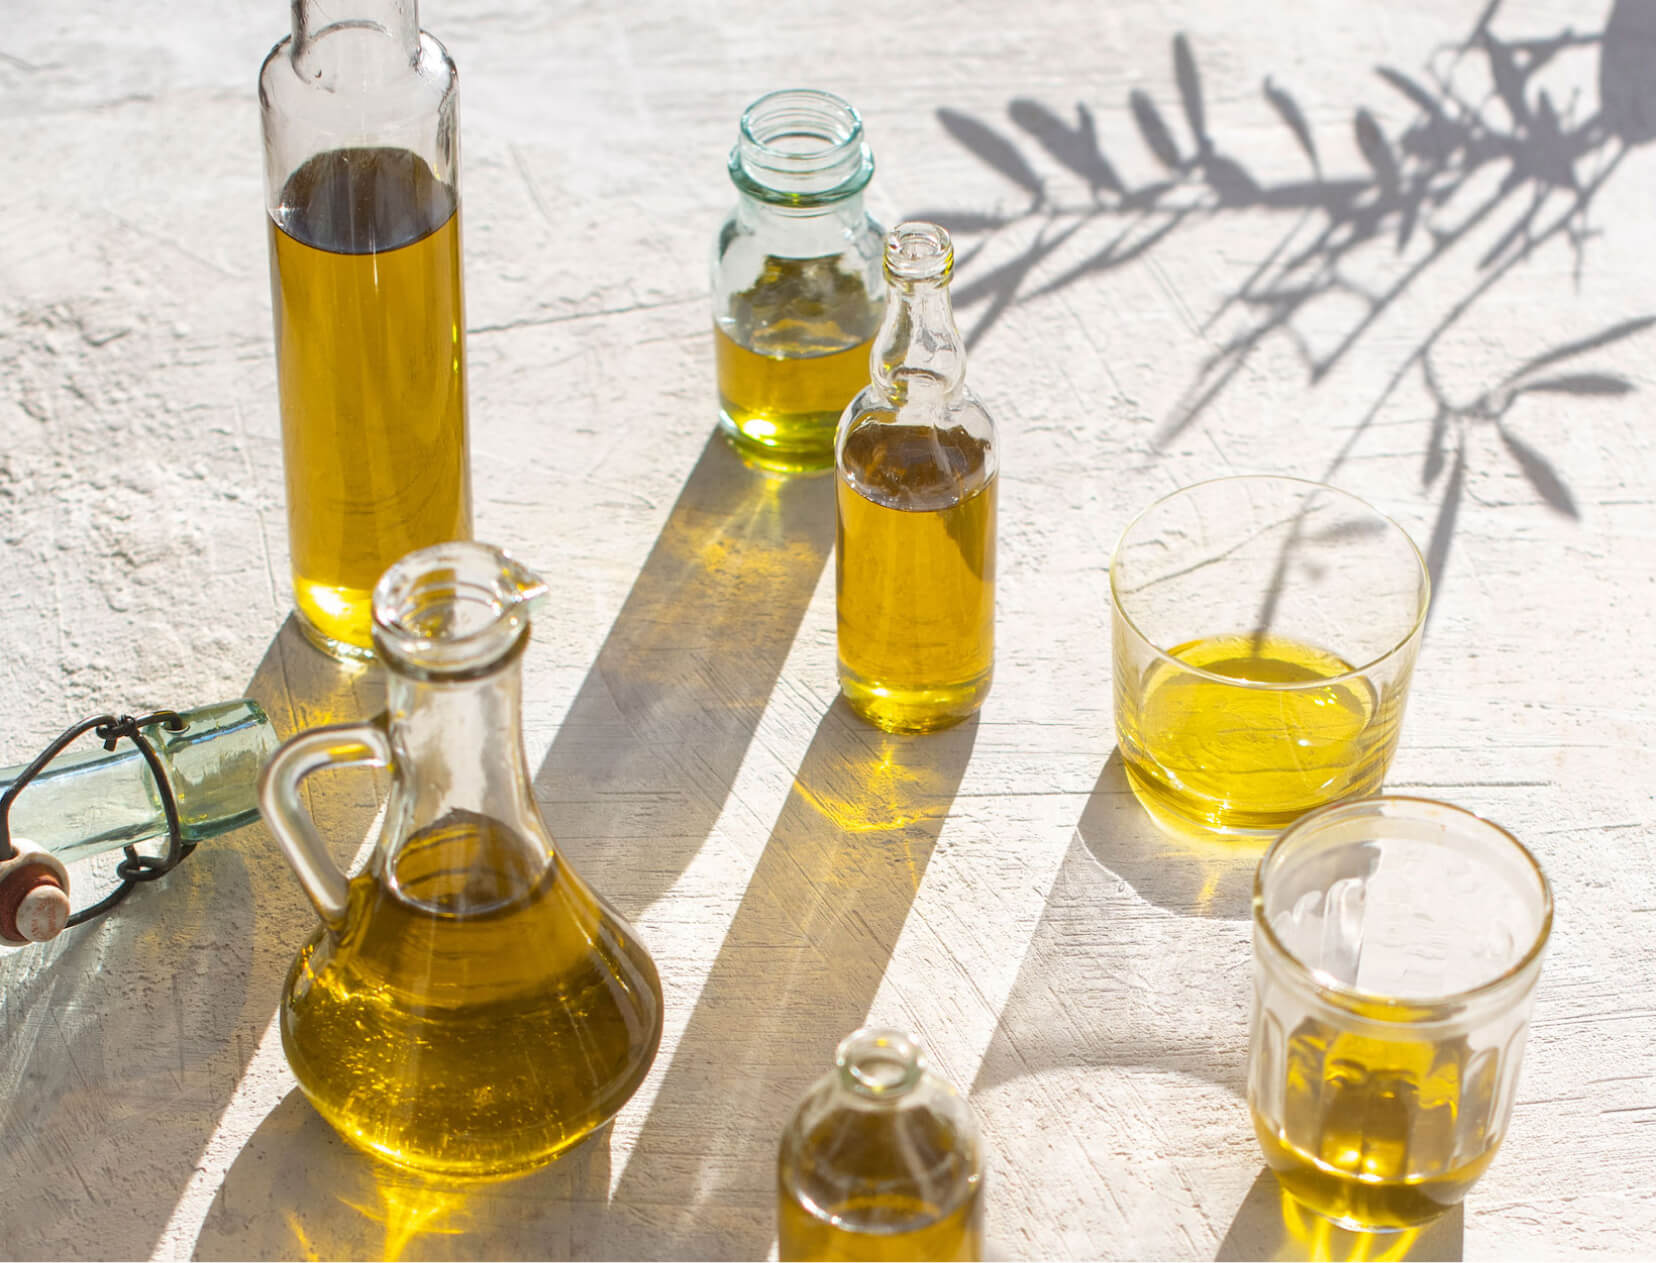 Are Seed Oils Bad for You? A Review of the Research | goop